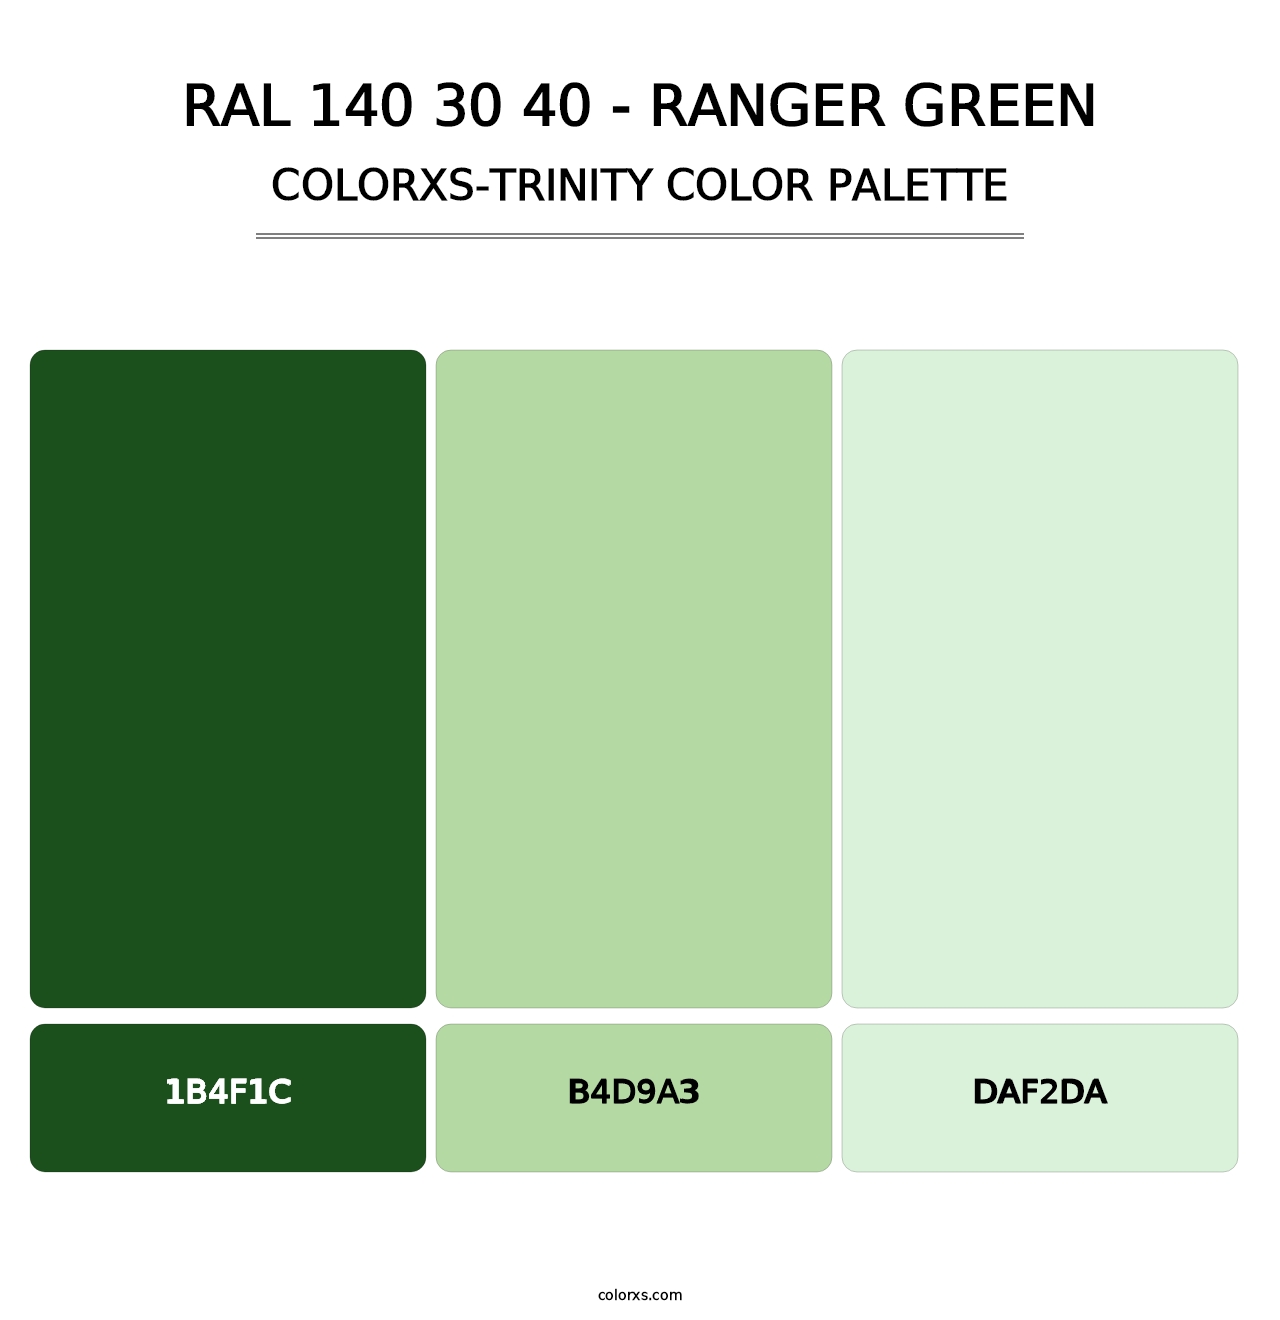 RAL 140 30 40 - Ranger Green - Colorxs Trinity Palette